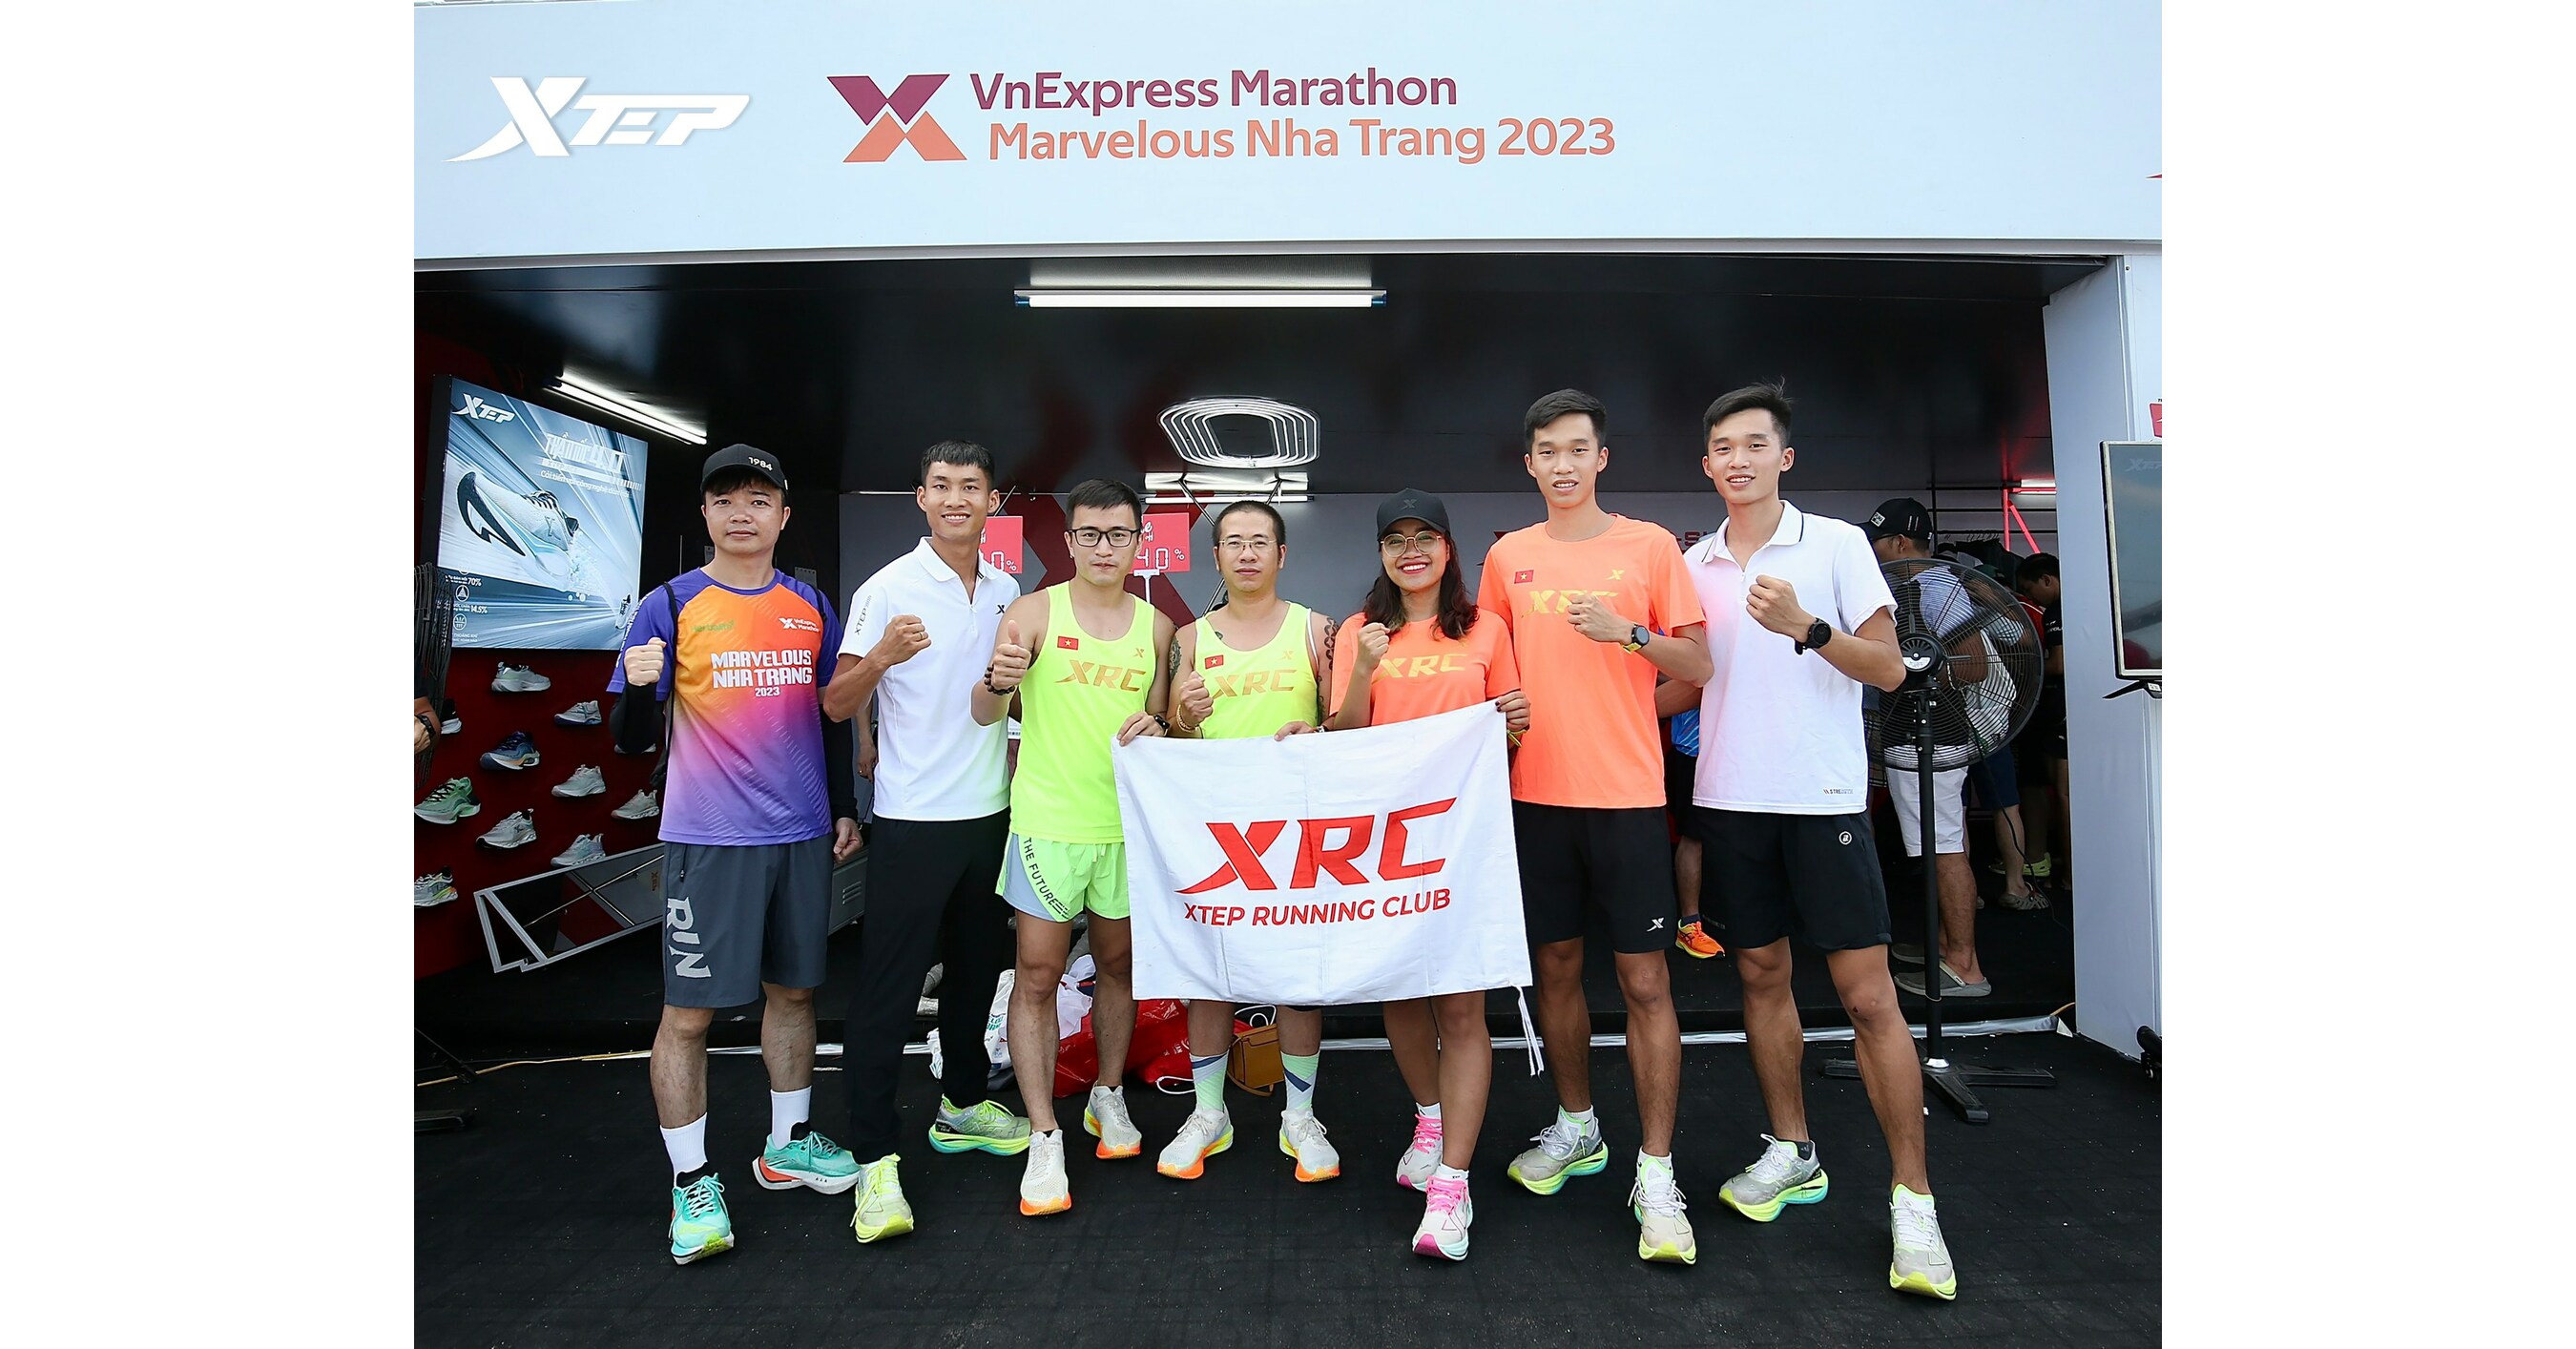 2XU opens first Canadian store - Canadian Running Magazine